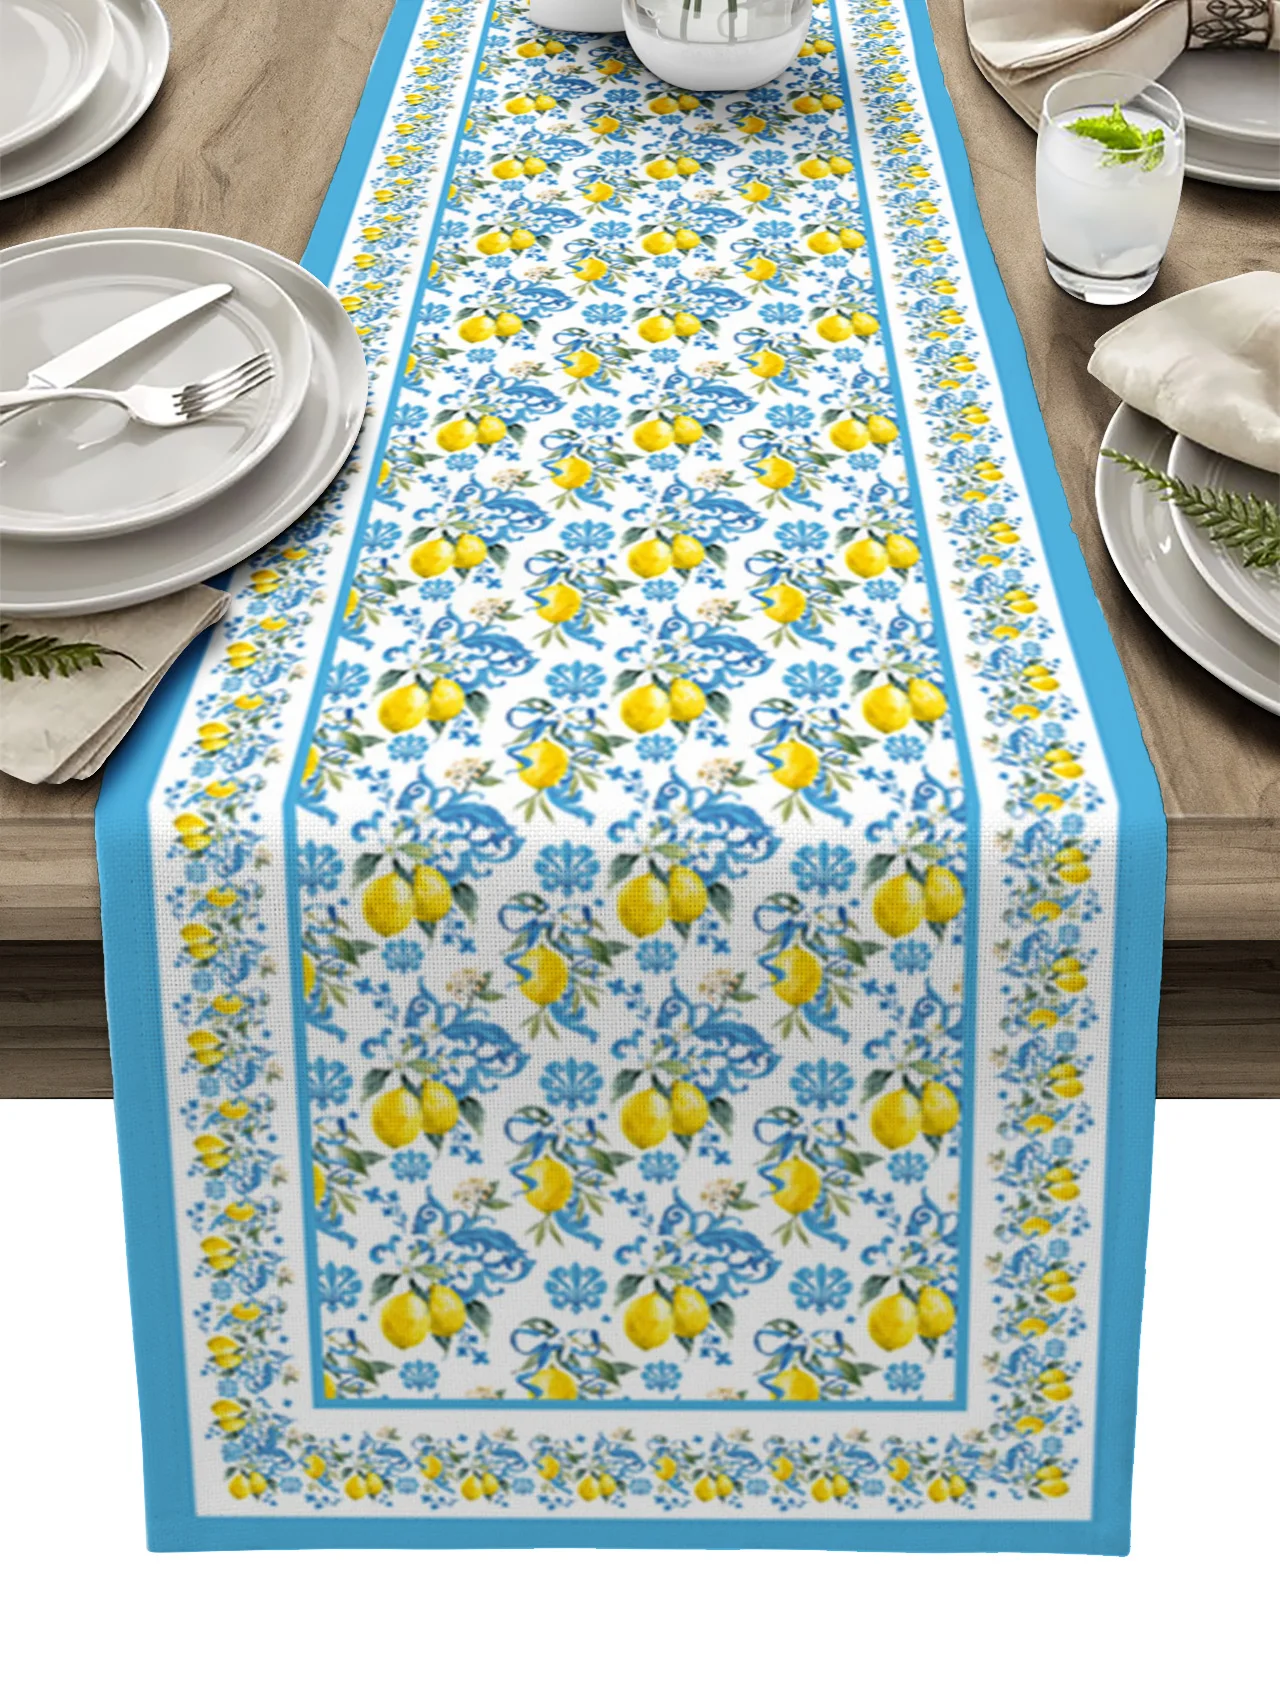 

Lemon And Baroque Decoration Table Runner luxury Kitchen Dinner Table Cover Wedding Party Decor Cotton Linen Tablecloth